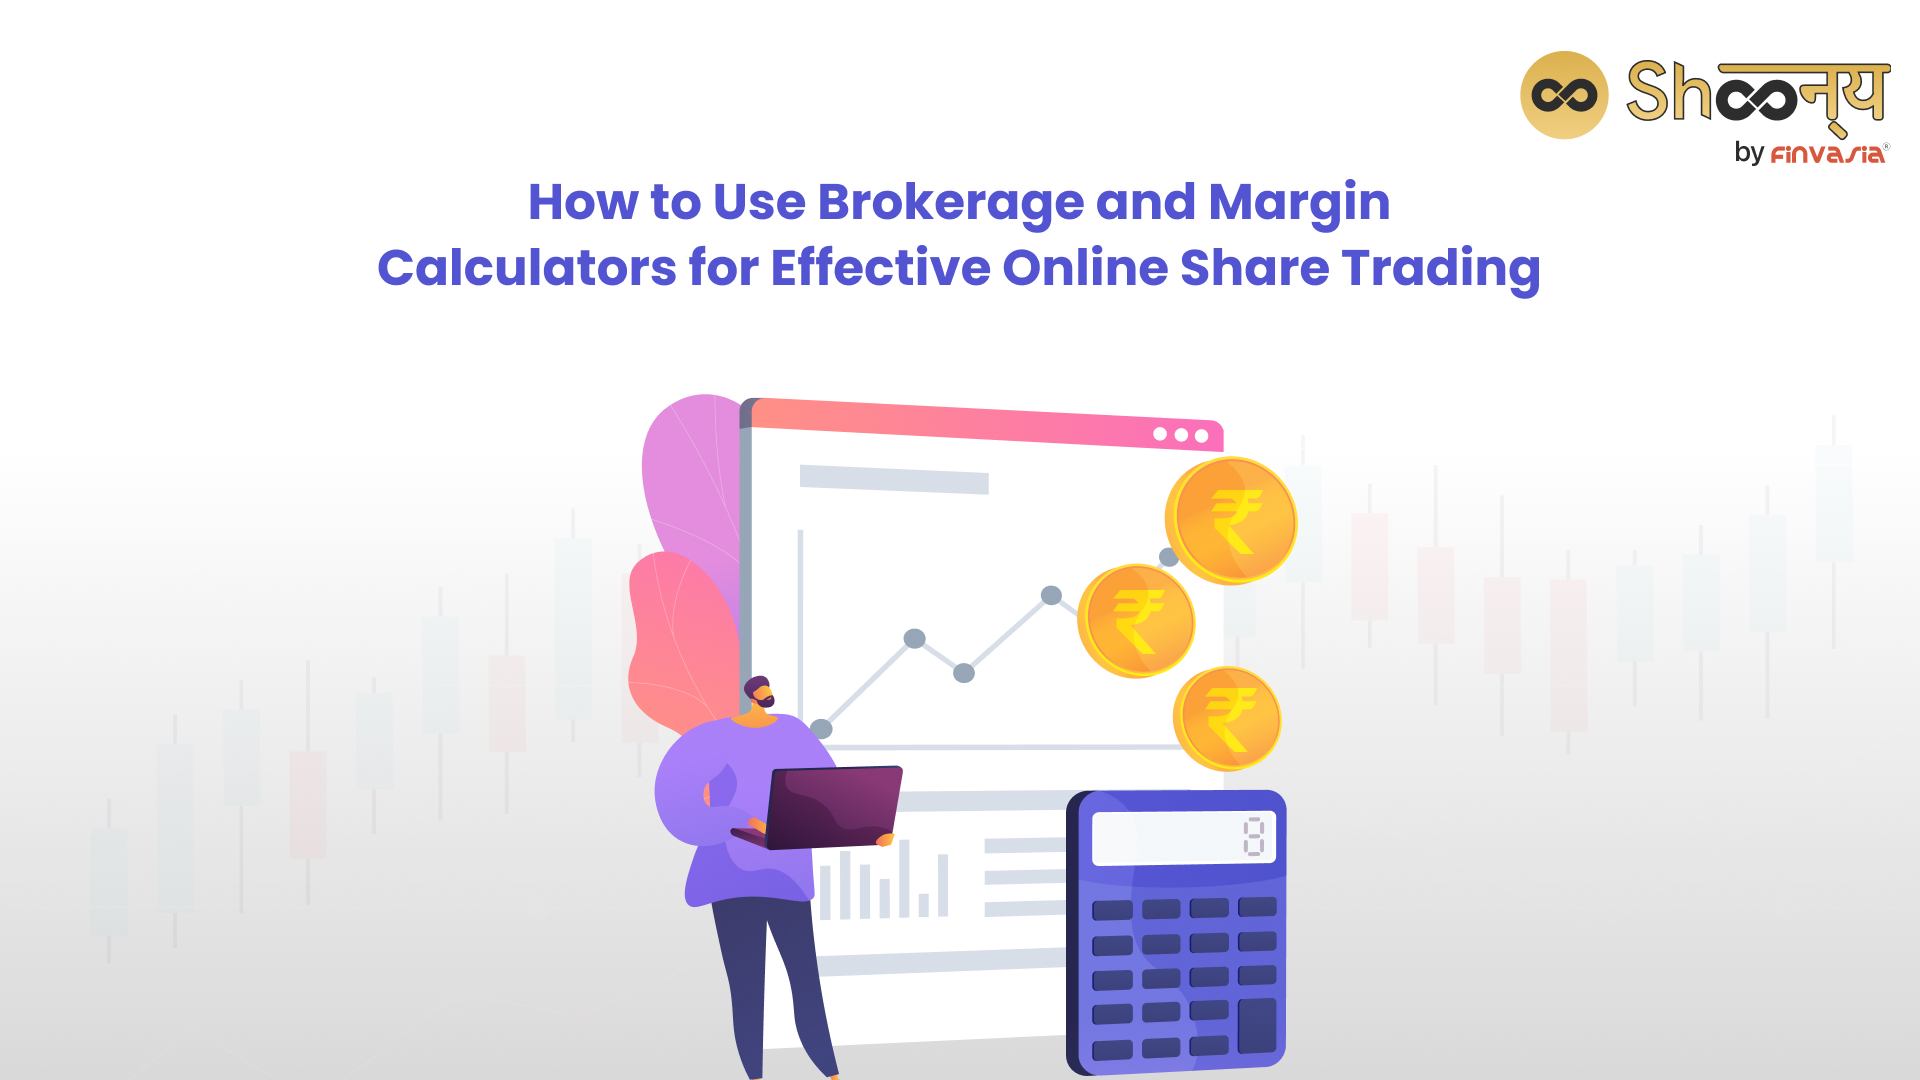 Brokerage and Margin Calculators for Online Share Trading